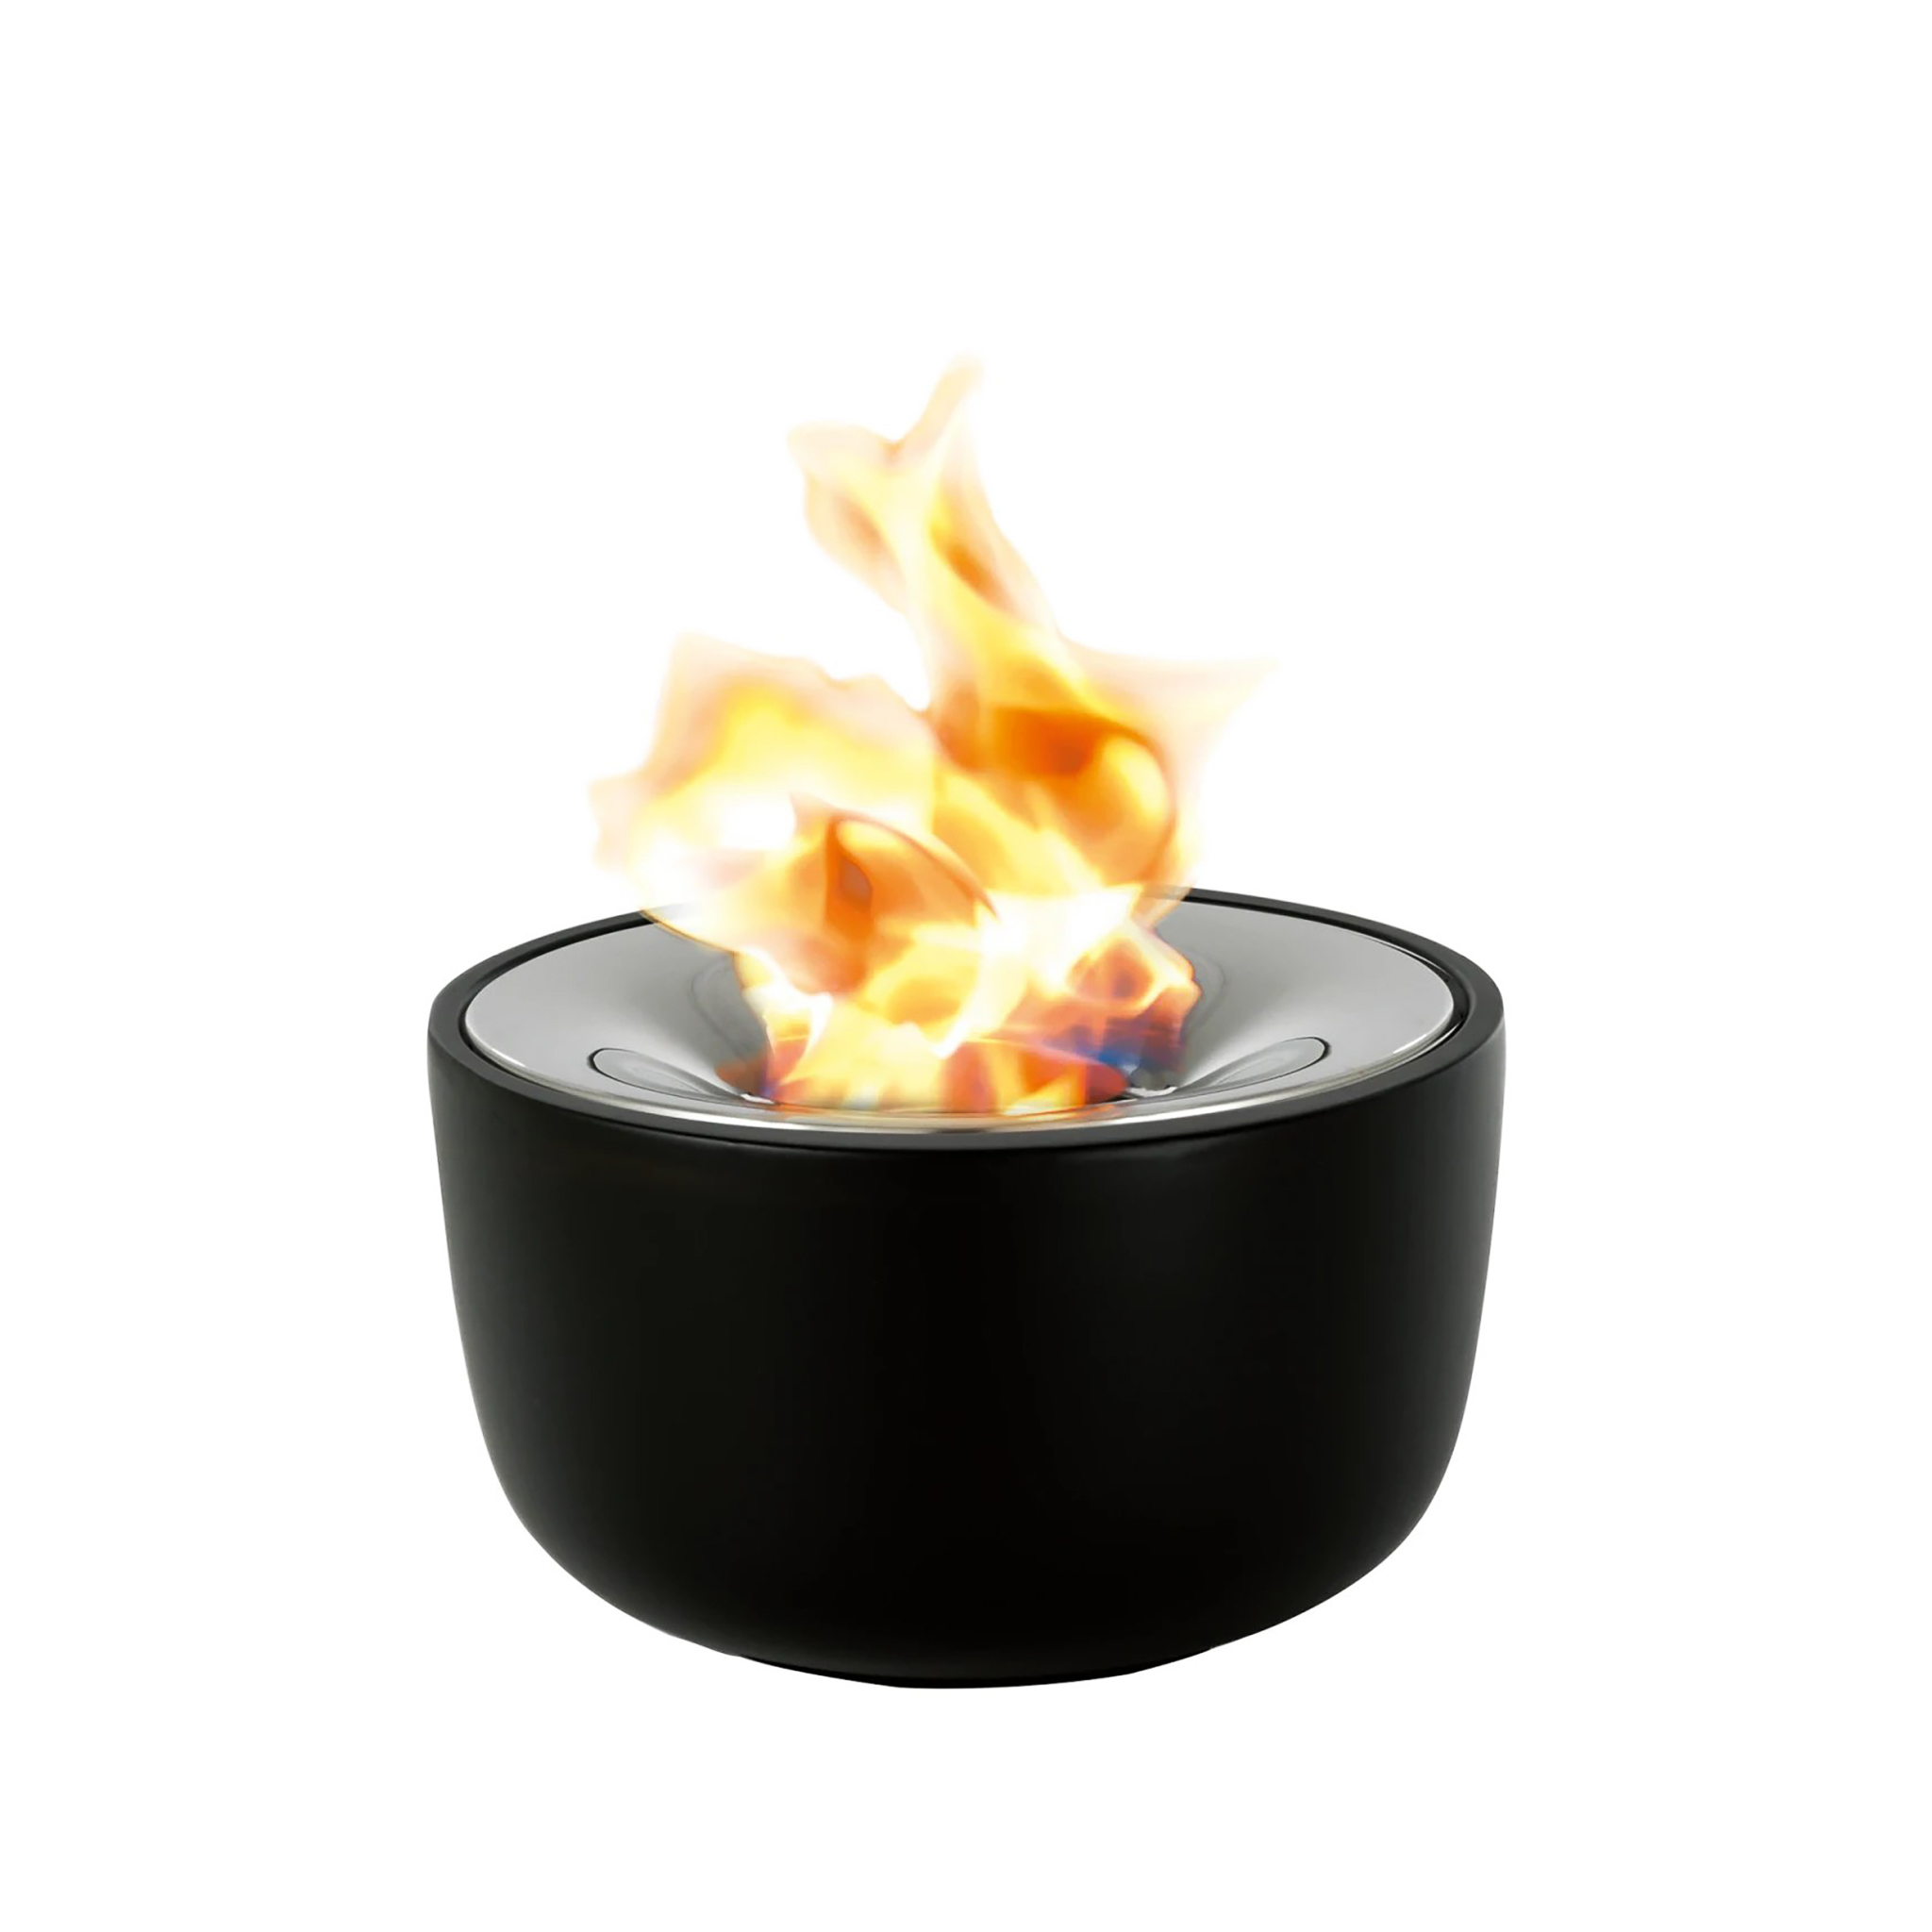 BLOMUS // FUOCO - GEL FIREPLACE | BLACK | MADE OF POLISHED STAINLESS STEEL Ø 18.5 CM